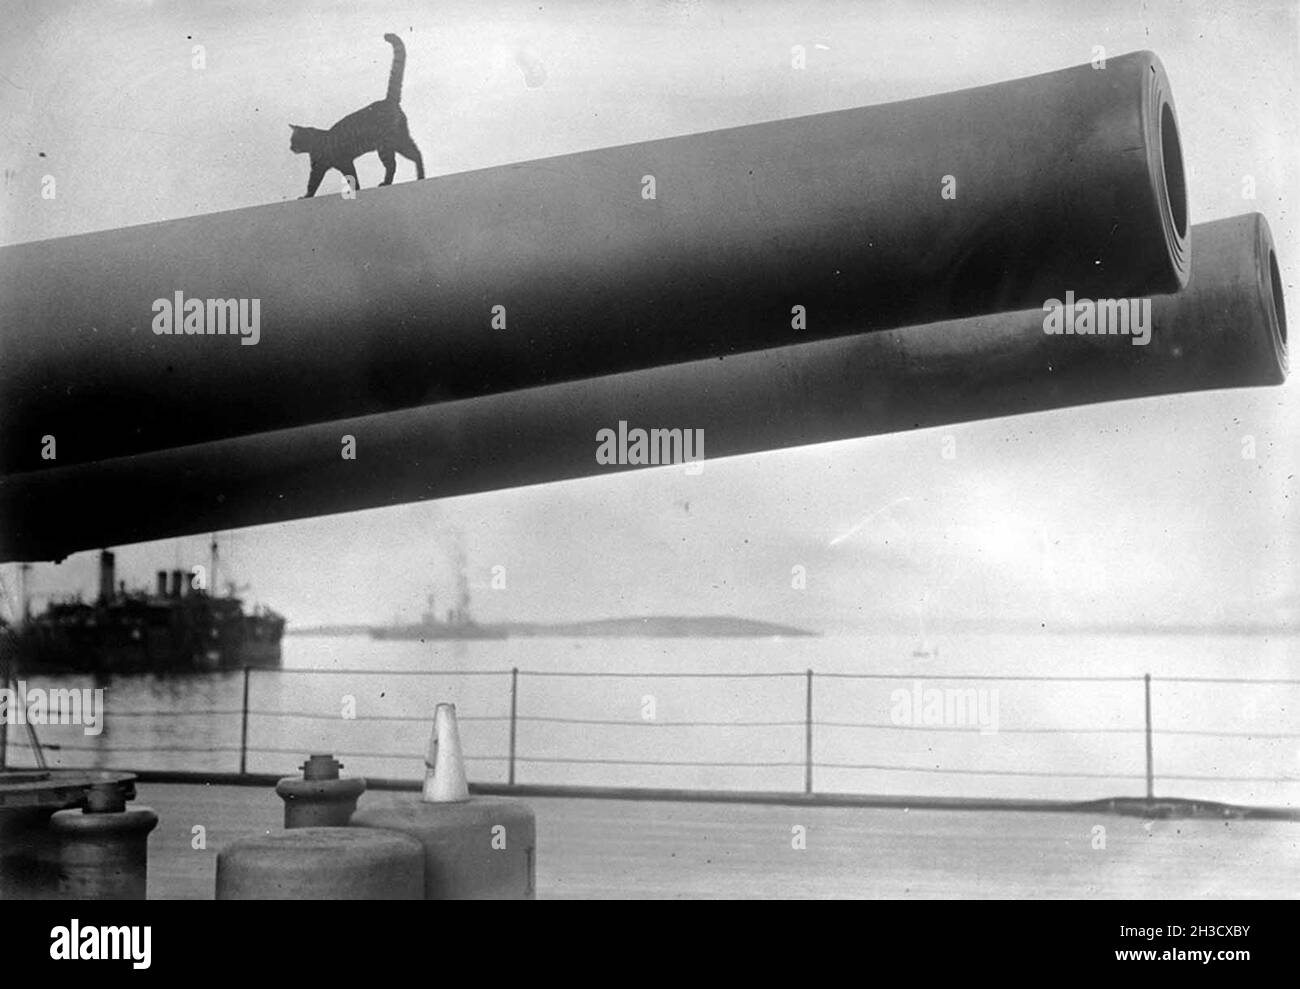 A cat, the mascot of the HMS Queen Elizabeth, walking on the barrel of one of the 15-inch guns. Stock Photo